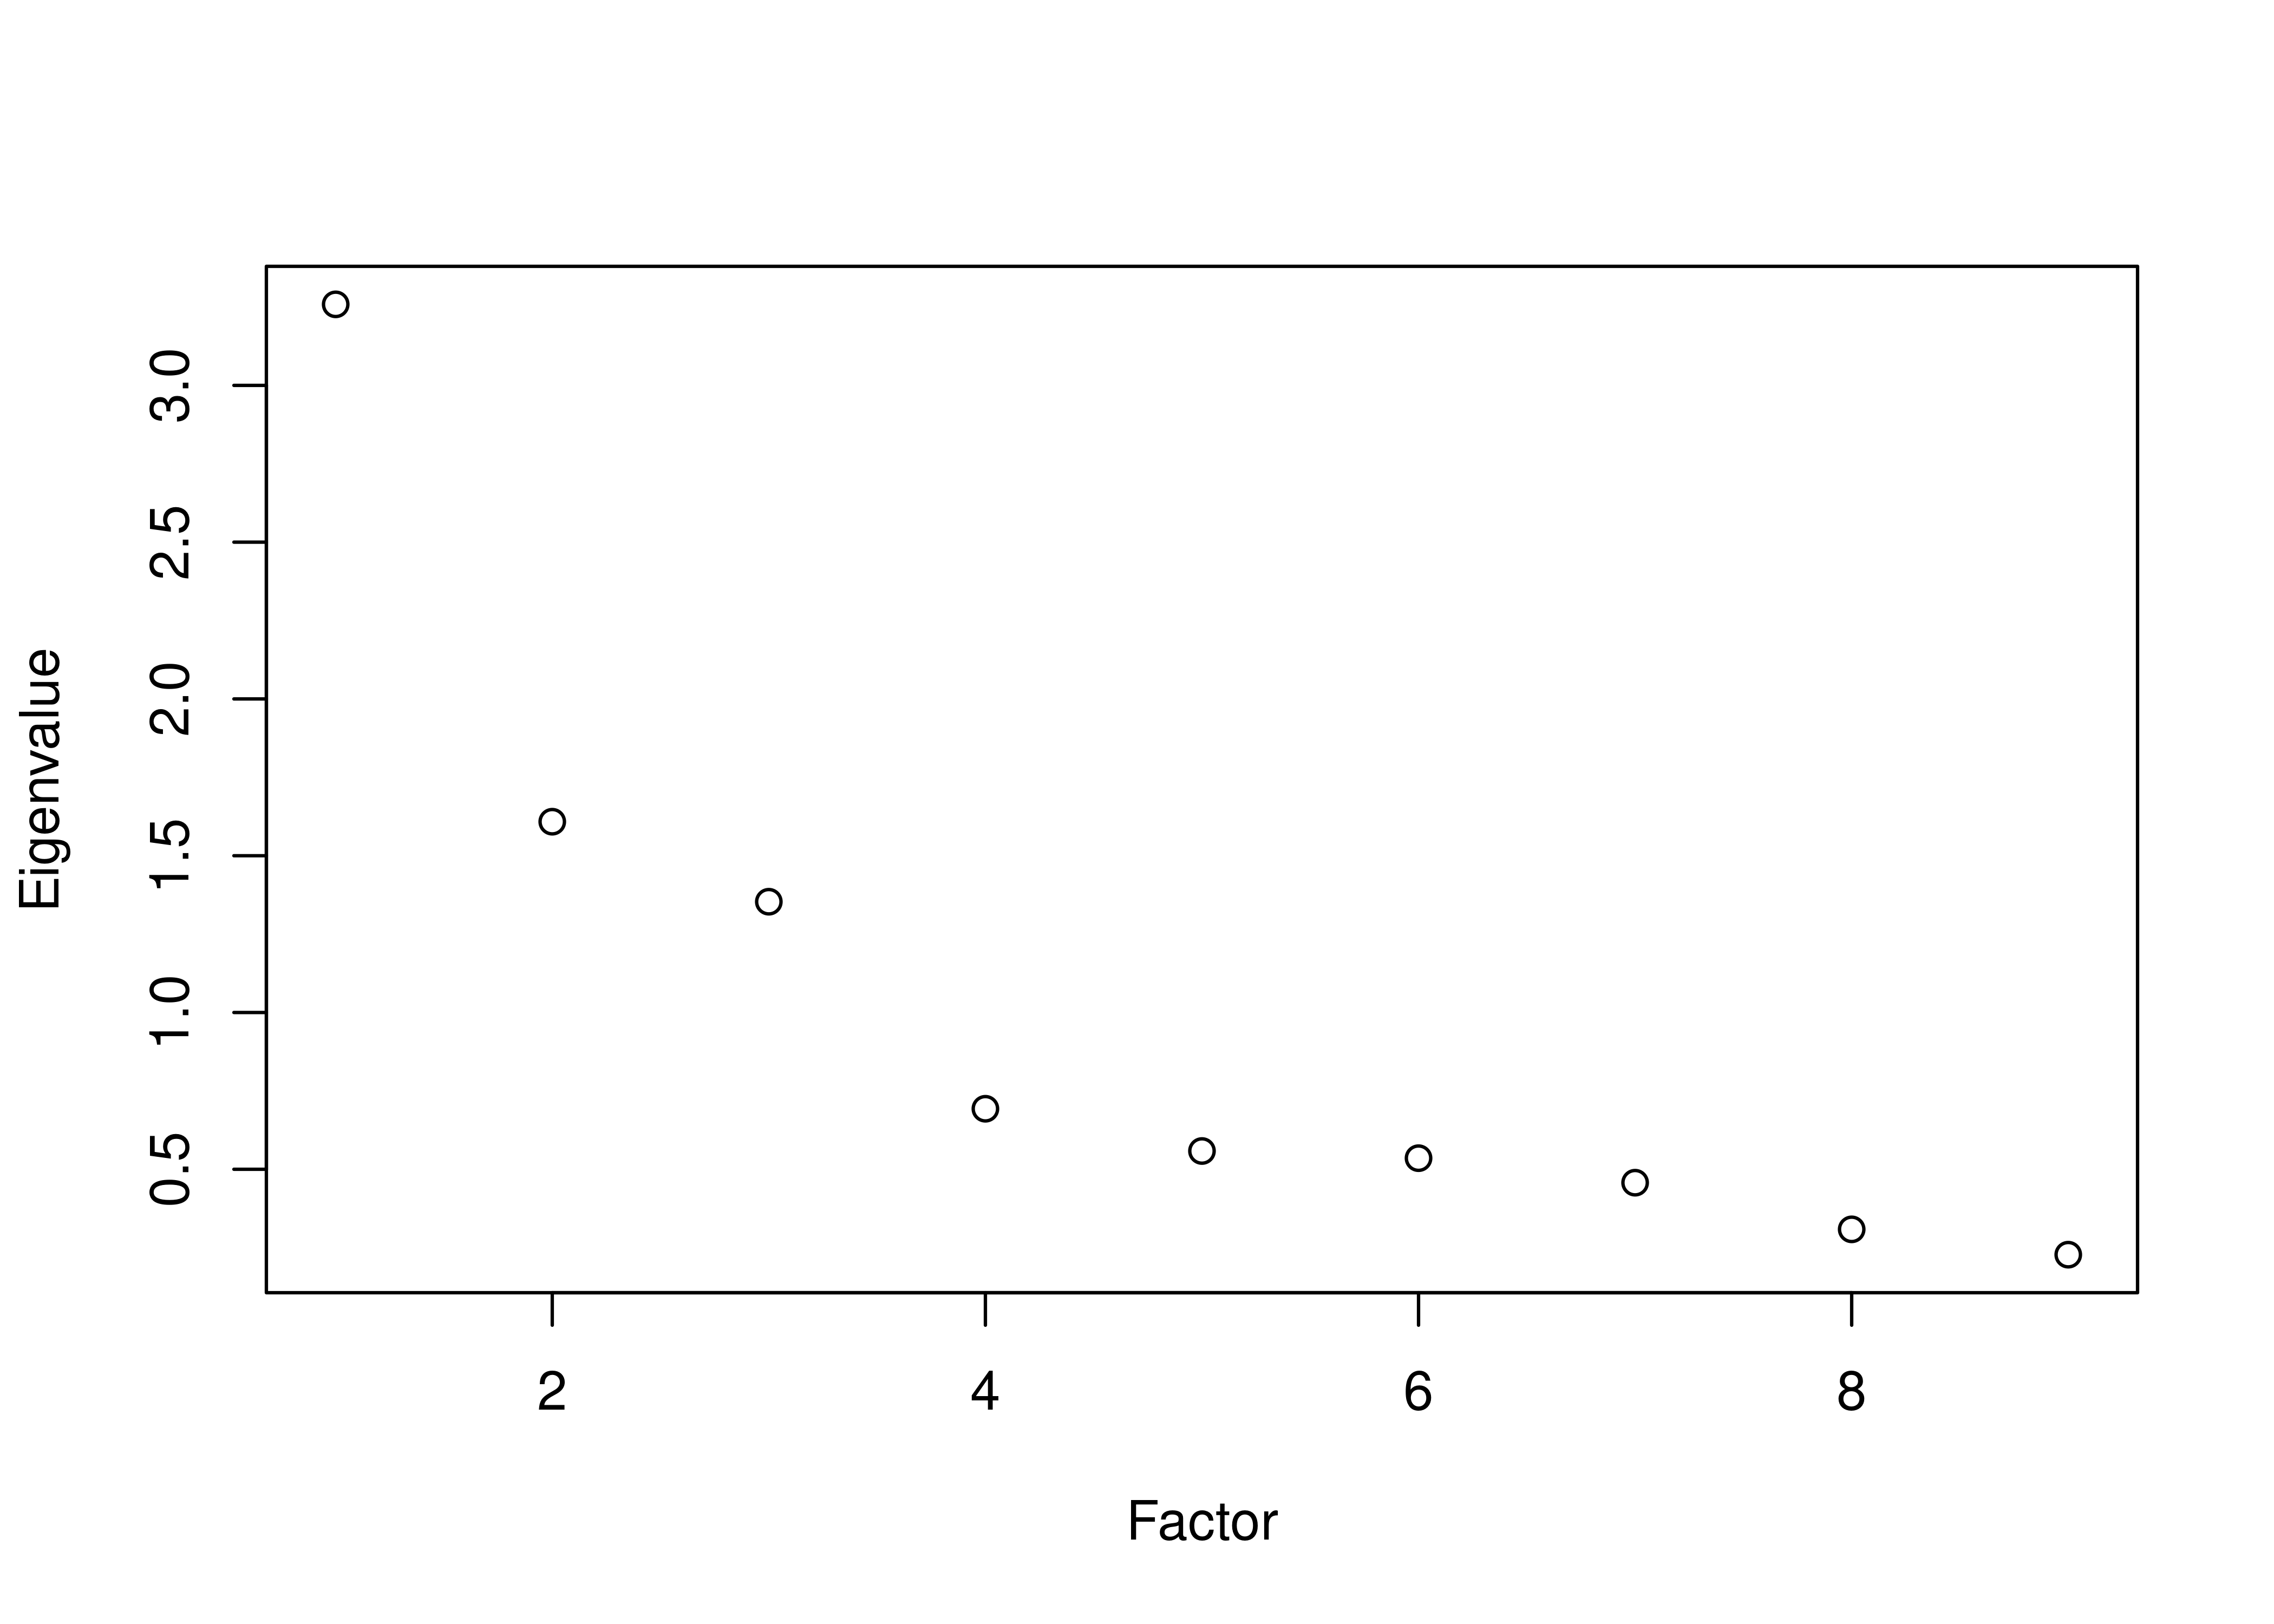 Scree Plot With Orthogonal Rotation in Exploratory Factor Analysis: psych.